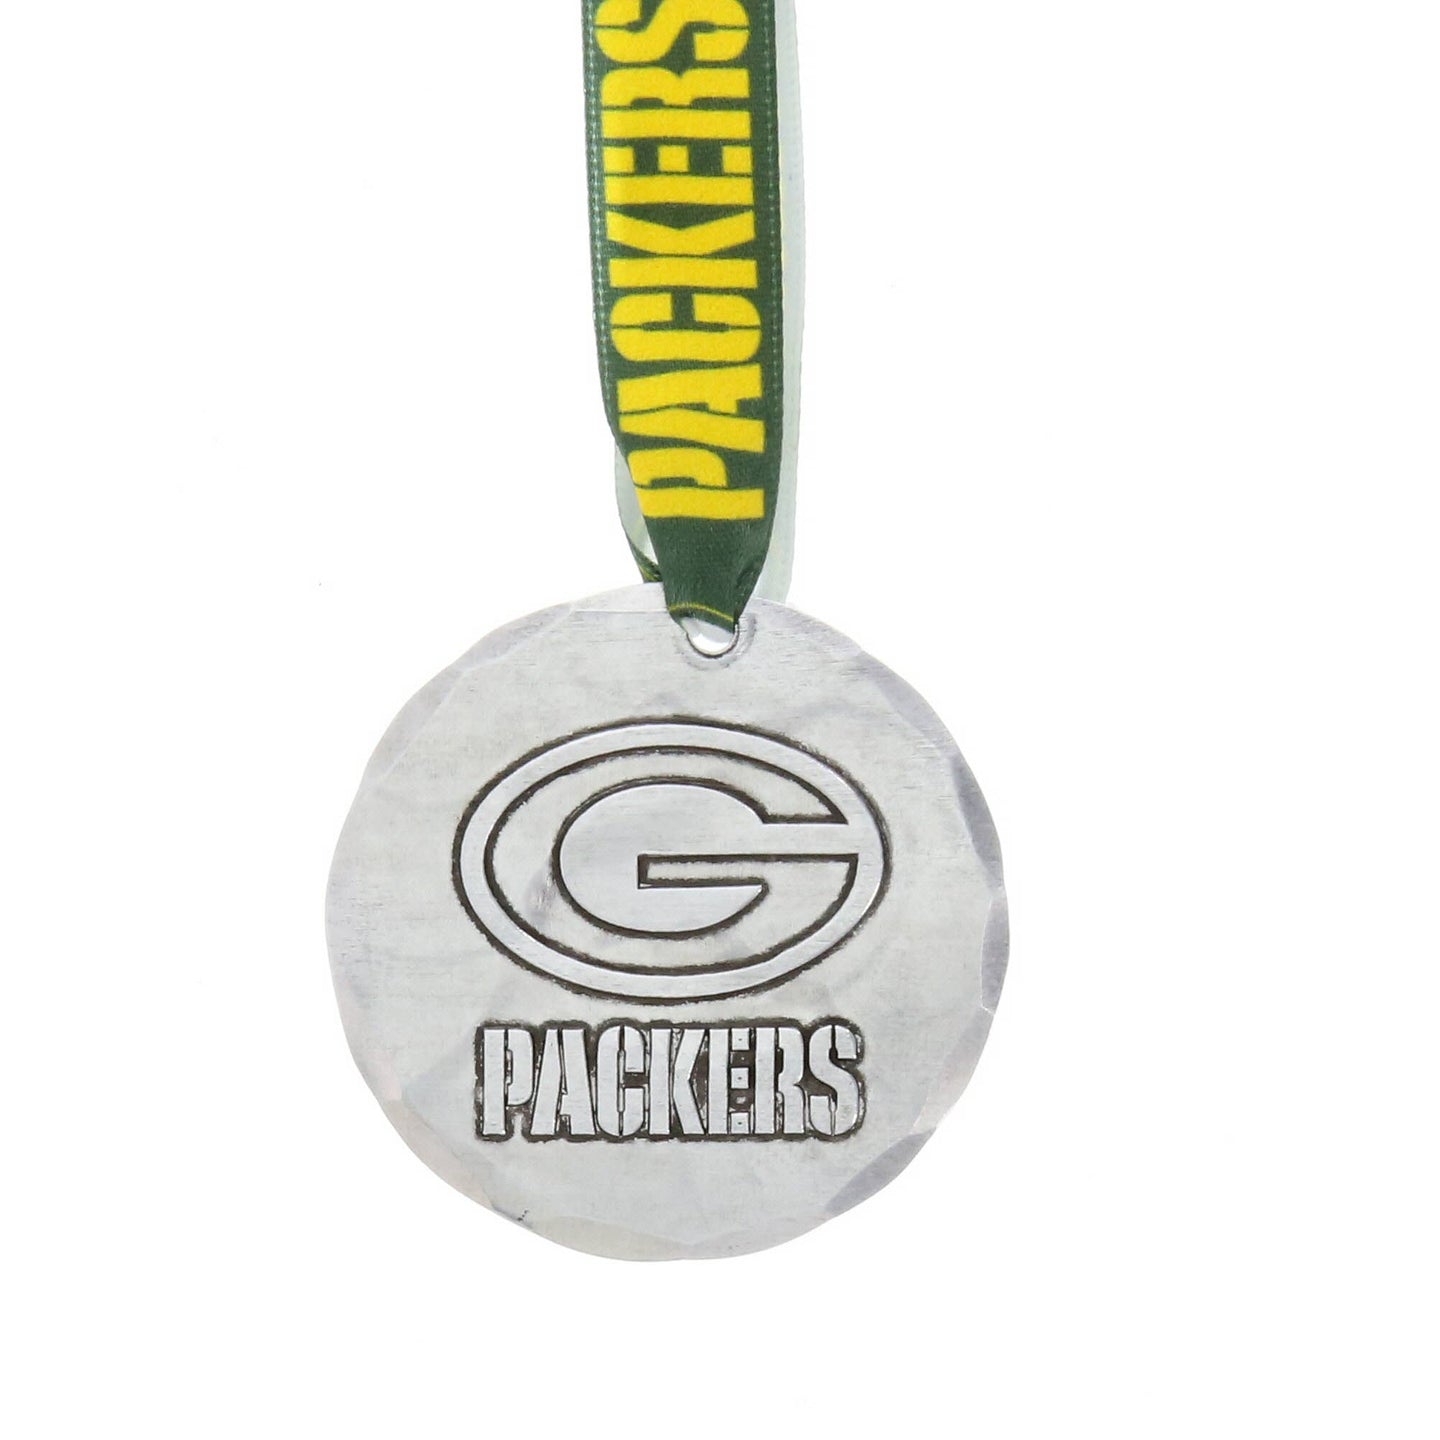 Green Bay Packers Small Round Ornament (Aluminum)